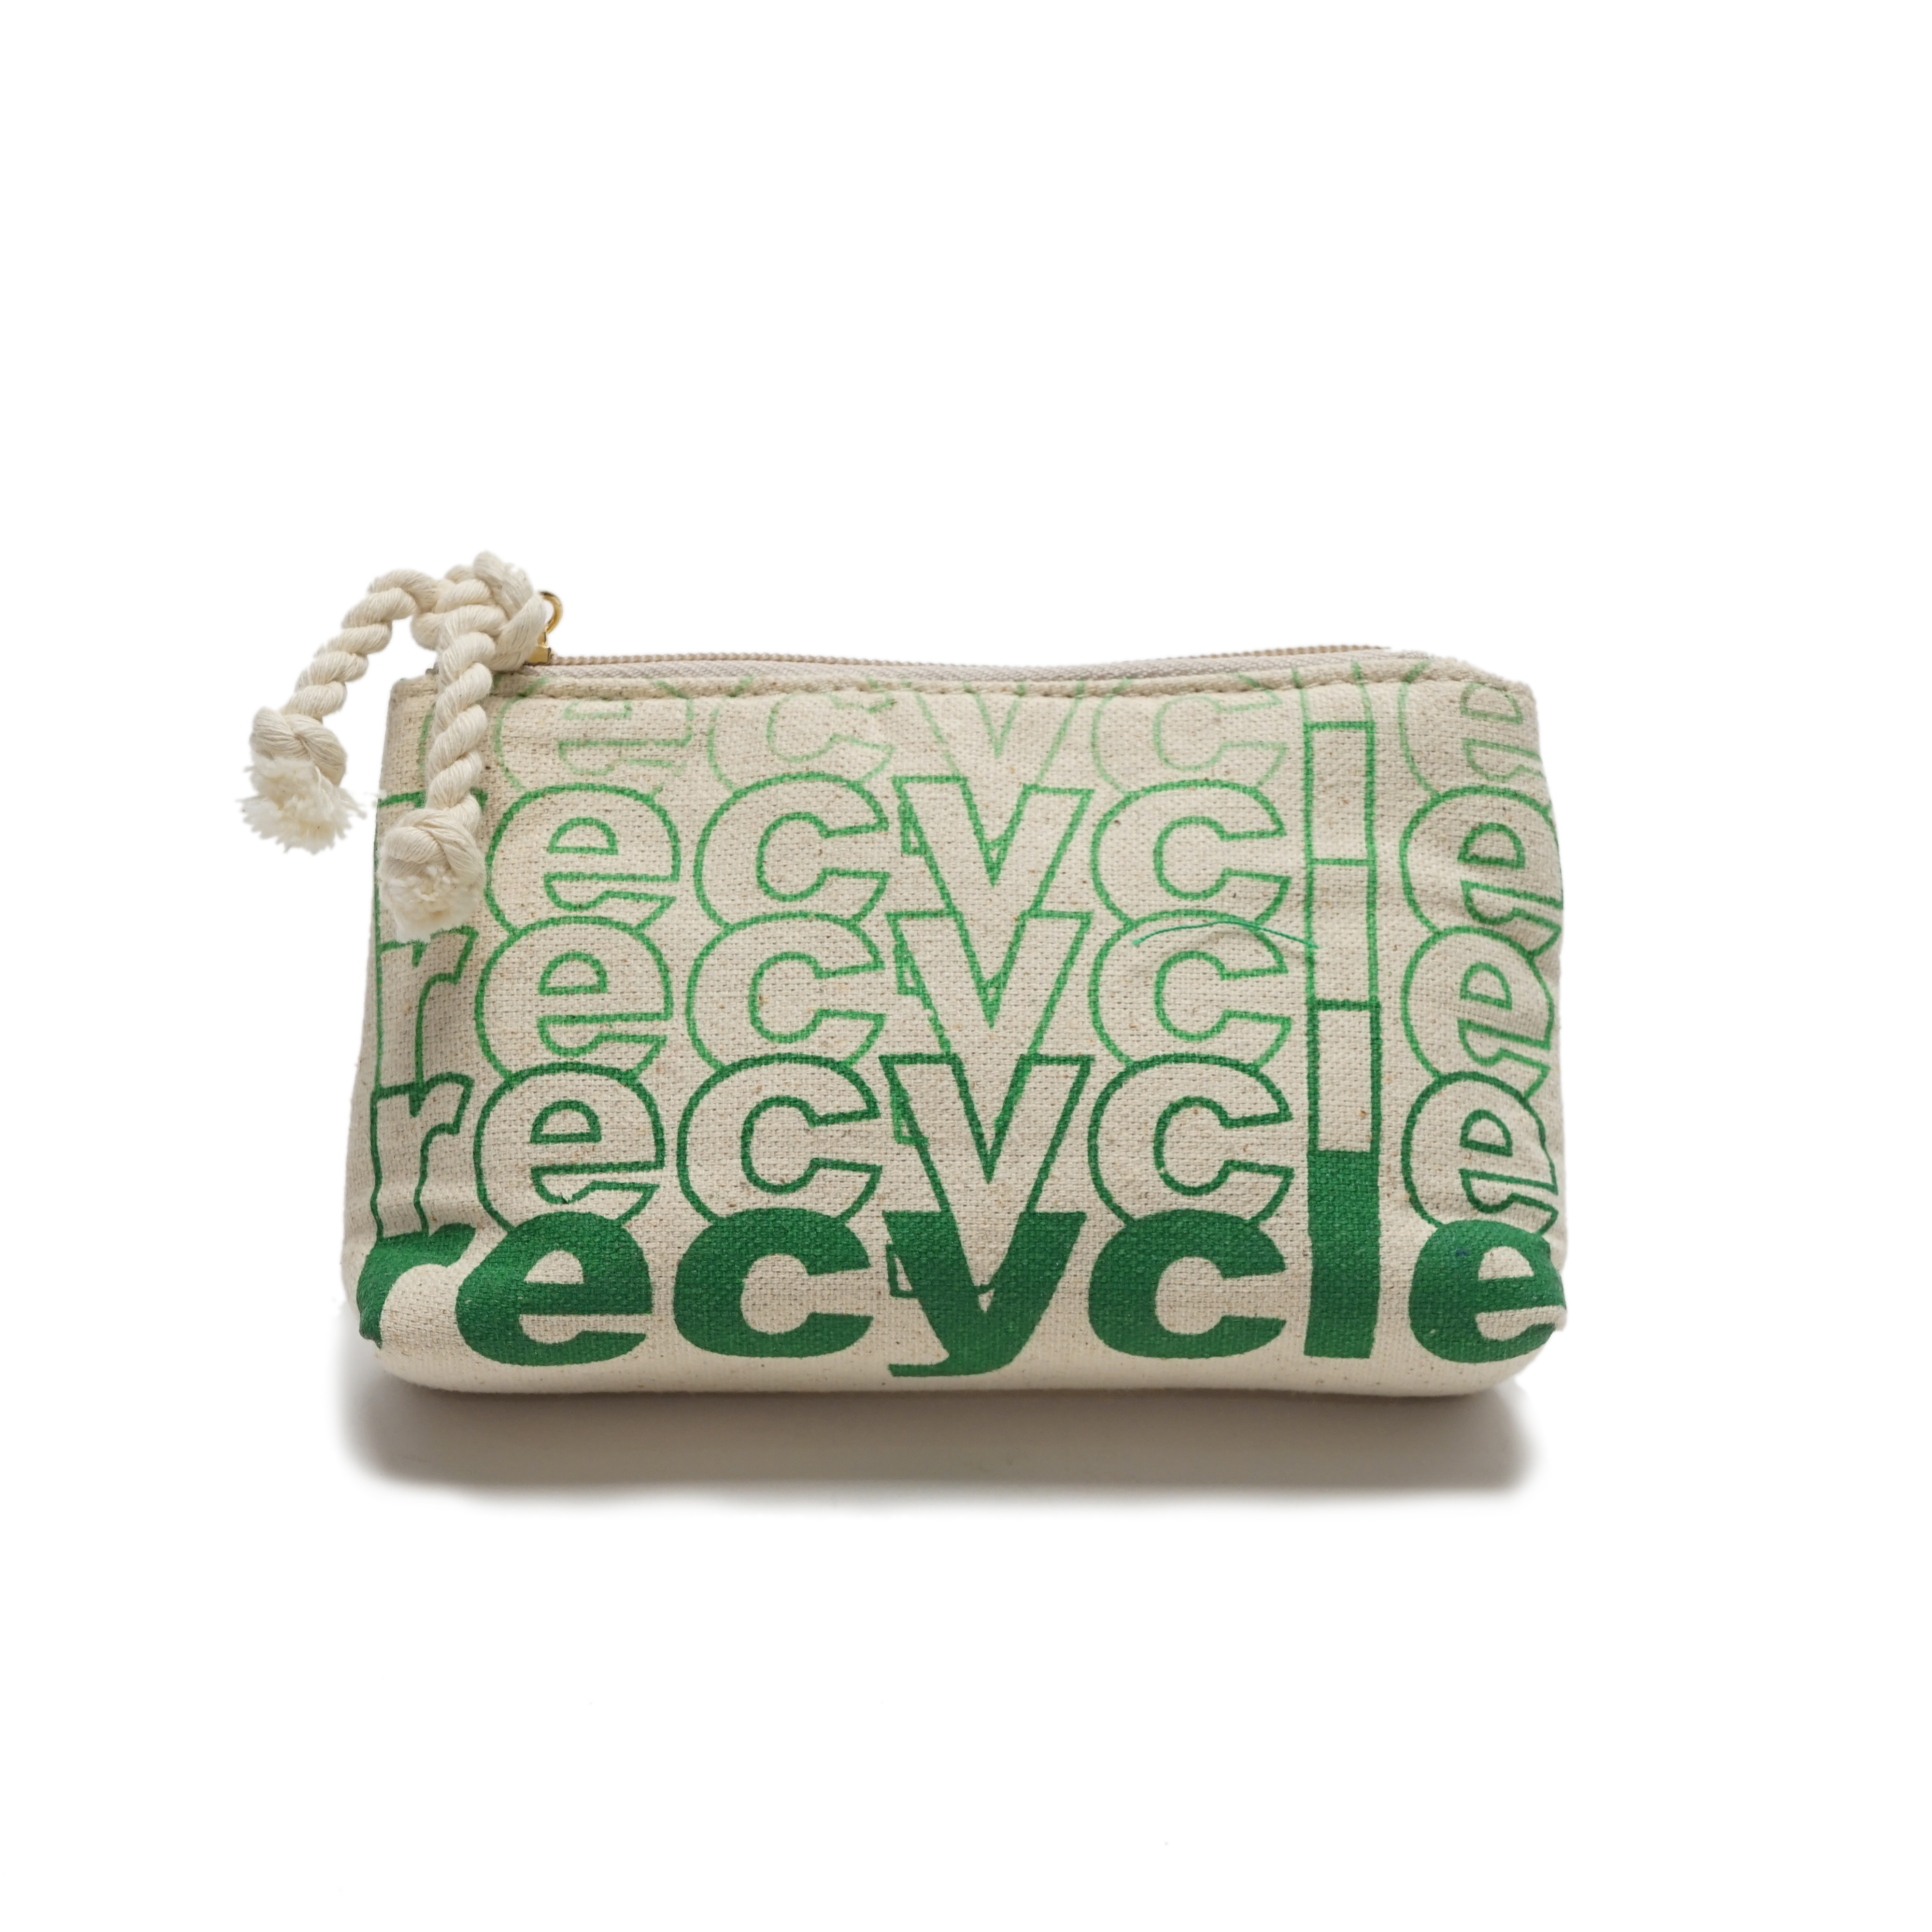 Recycled canvas pouch